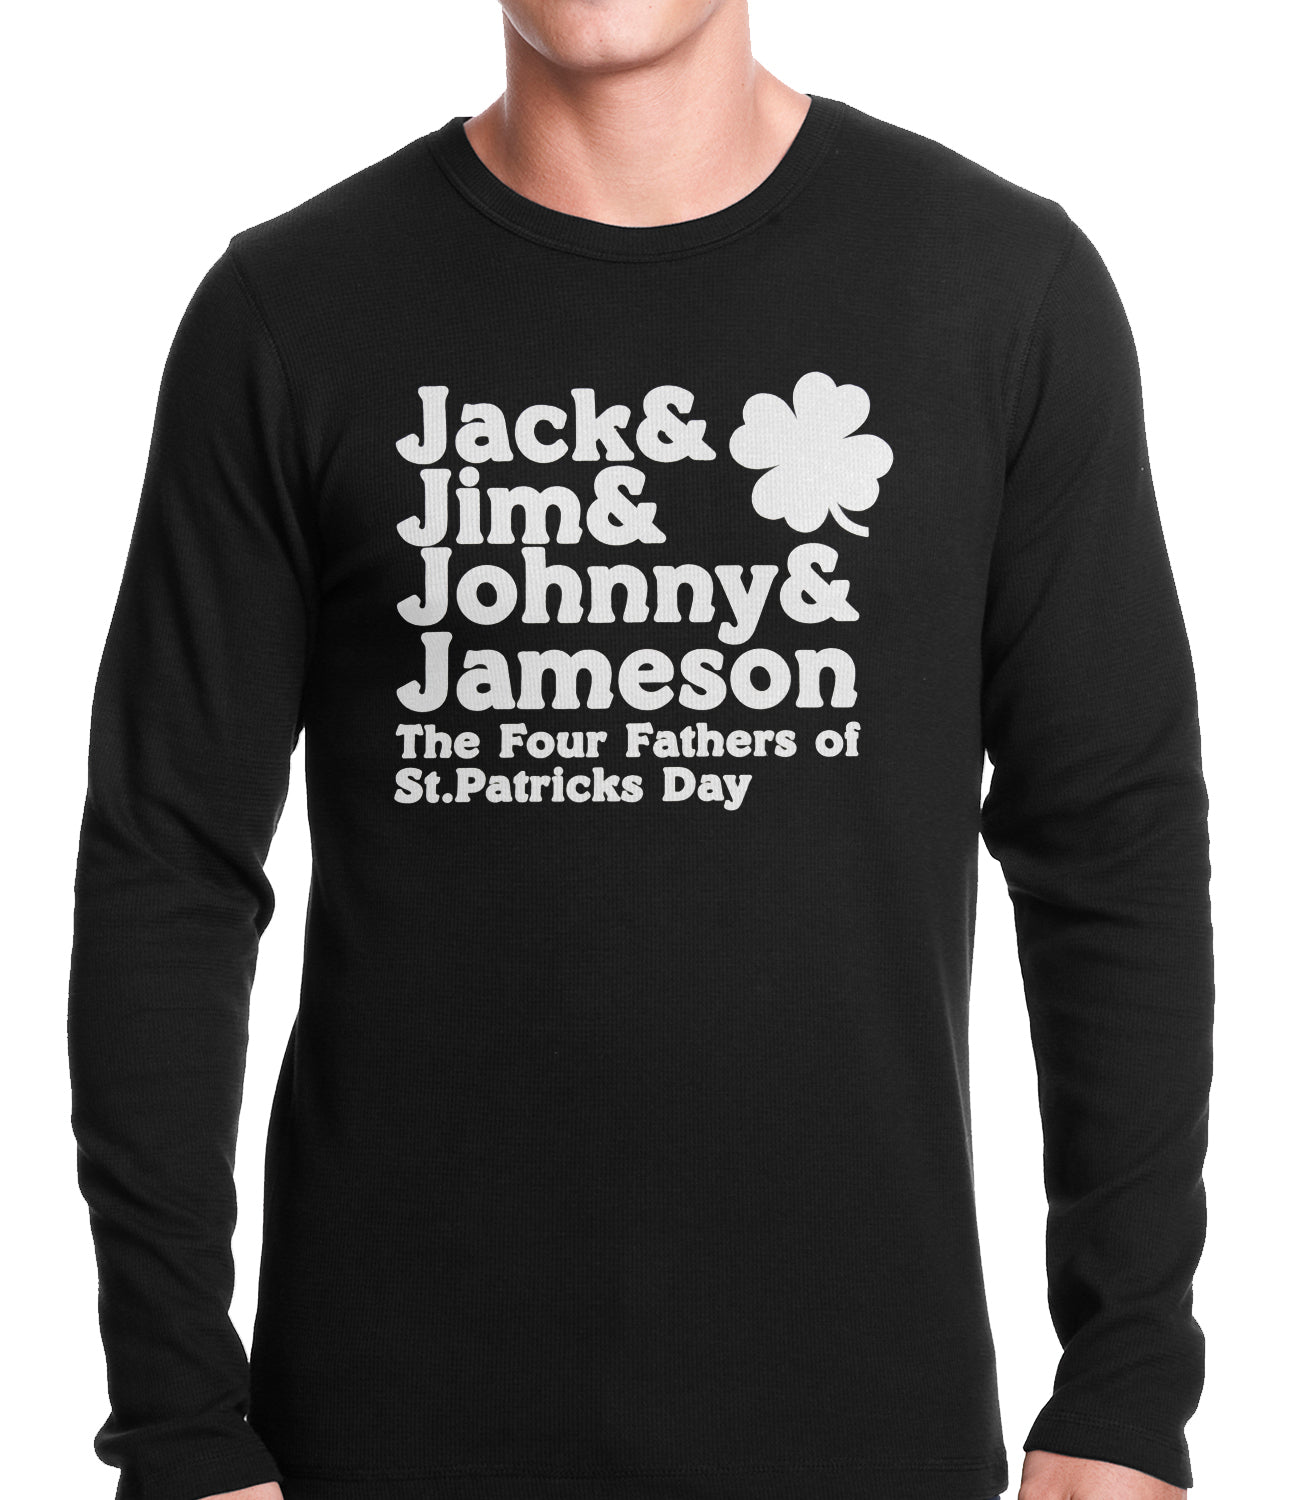 The Four Fathers of St. Patrick's Day Thermal Shirt